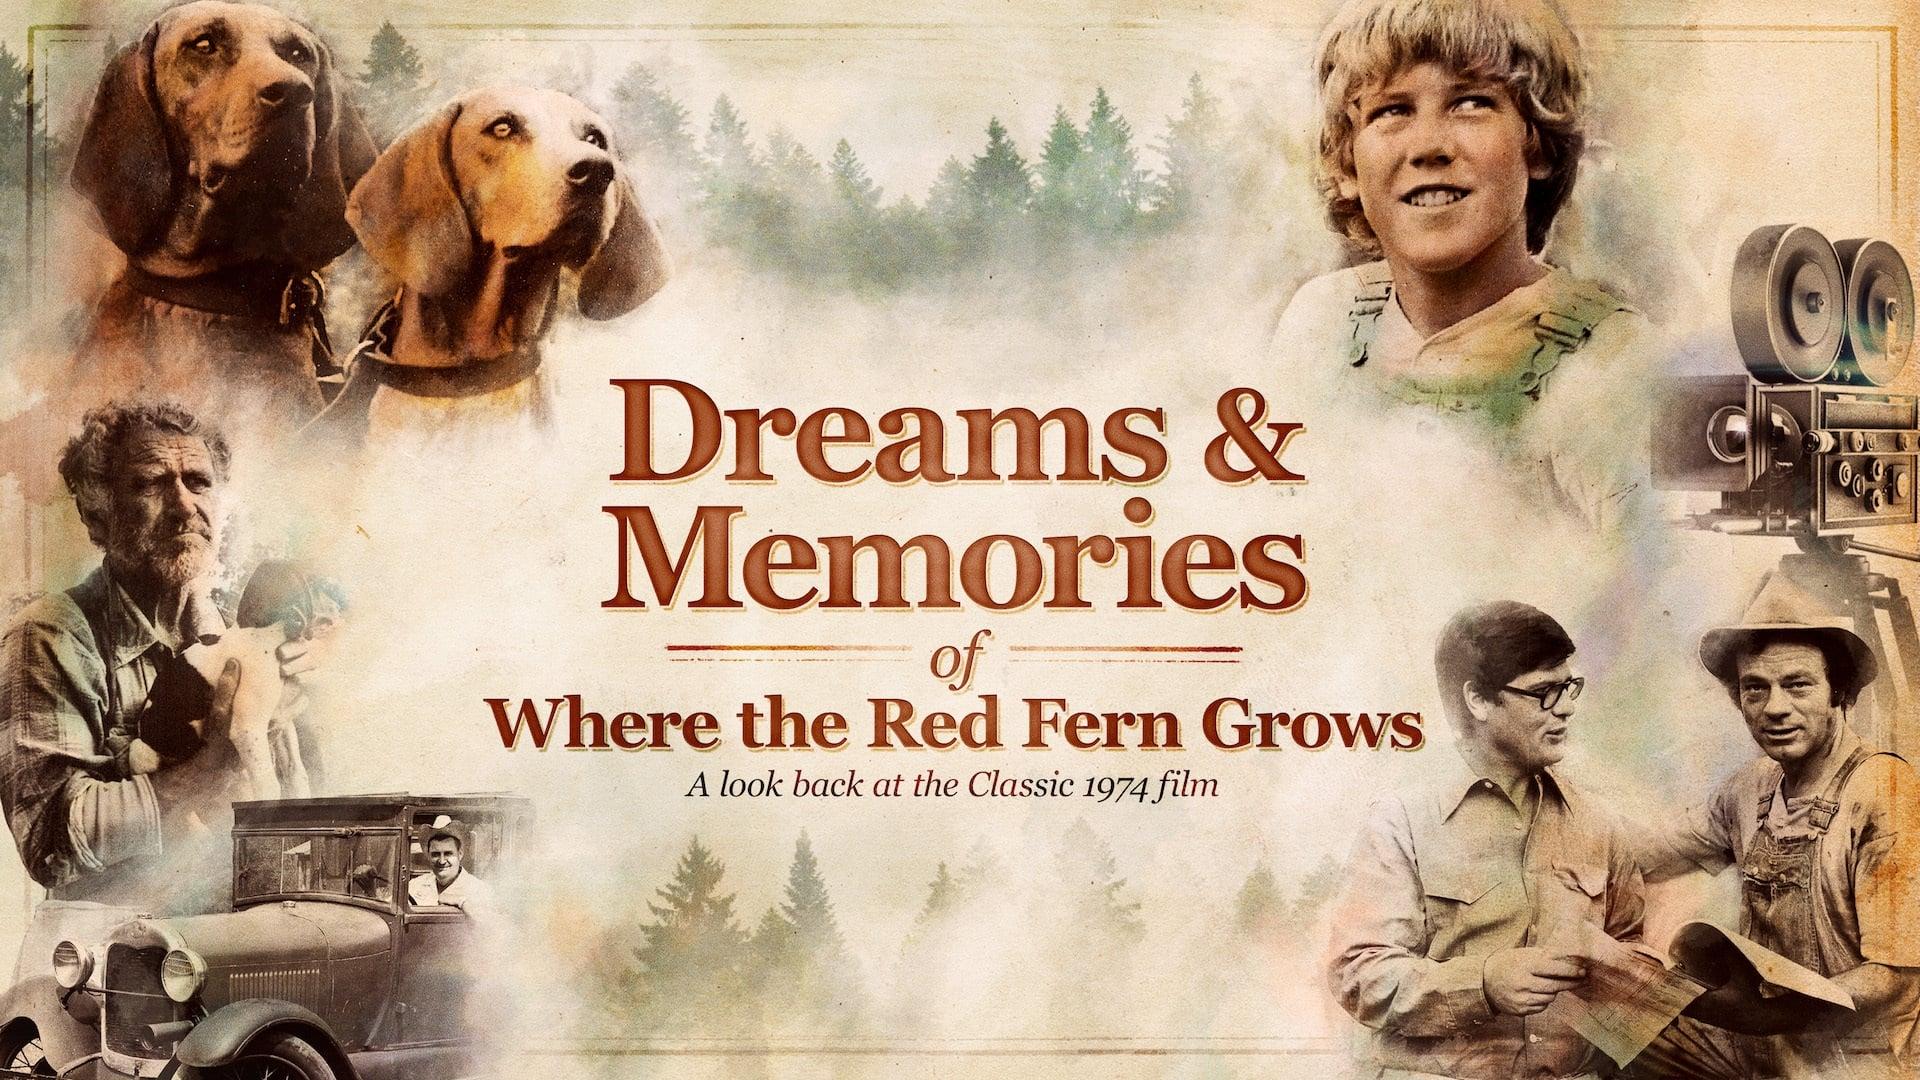 Dreams and Memories of Where the Red Fern Grows backdrop